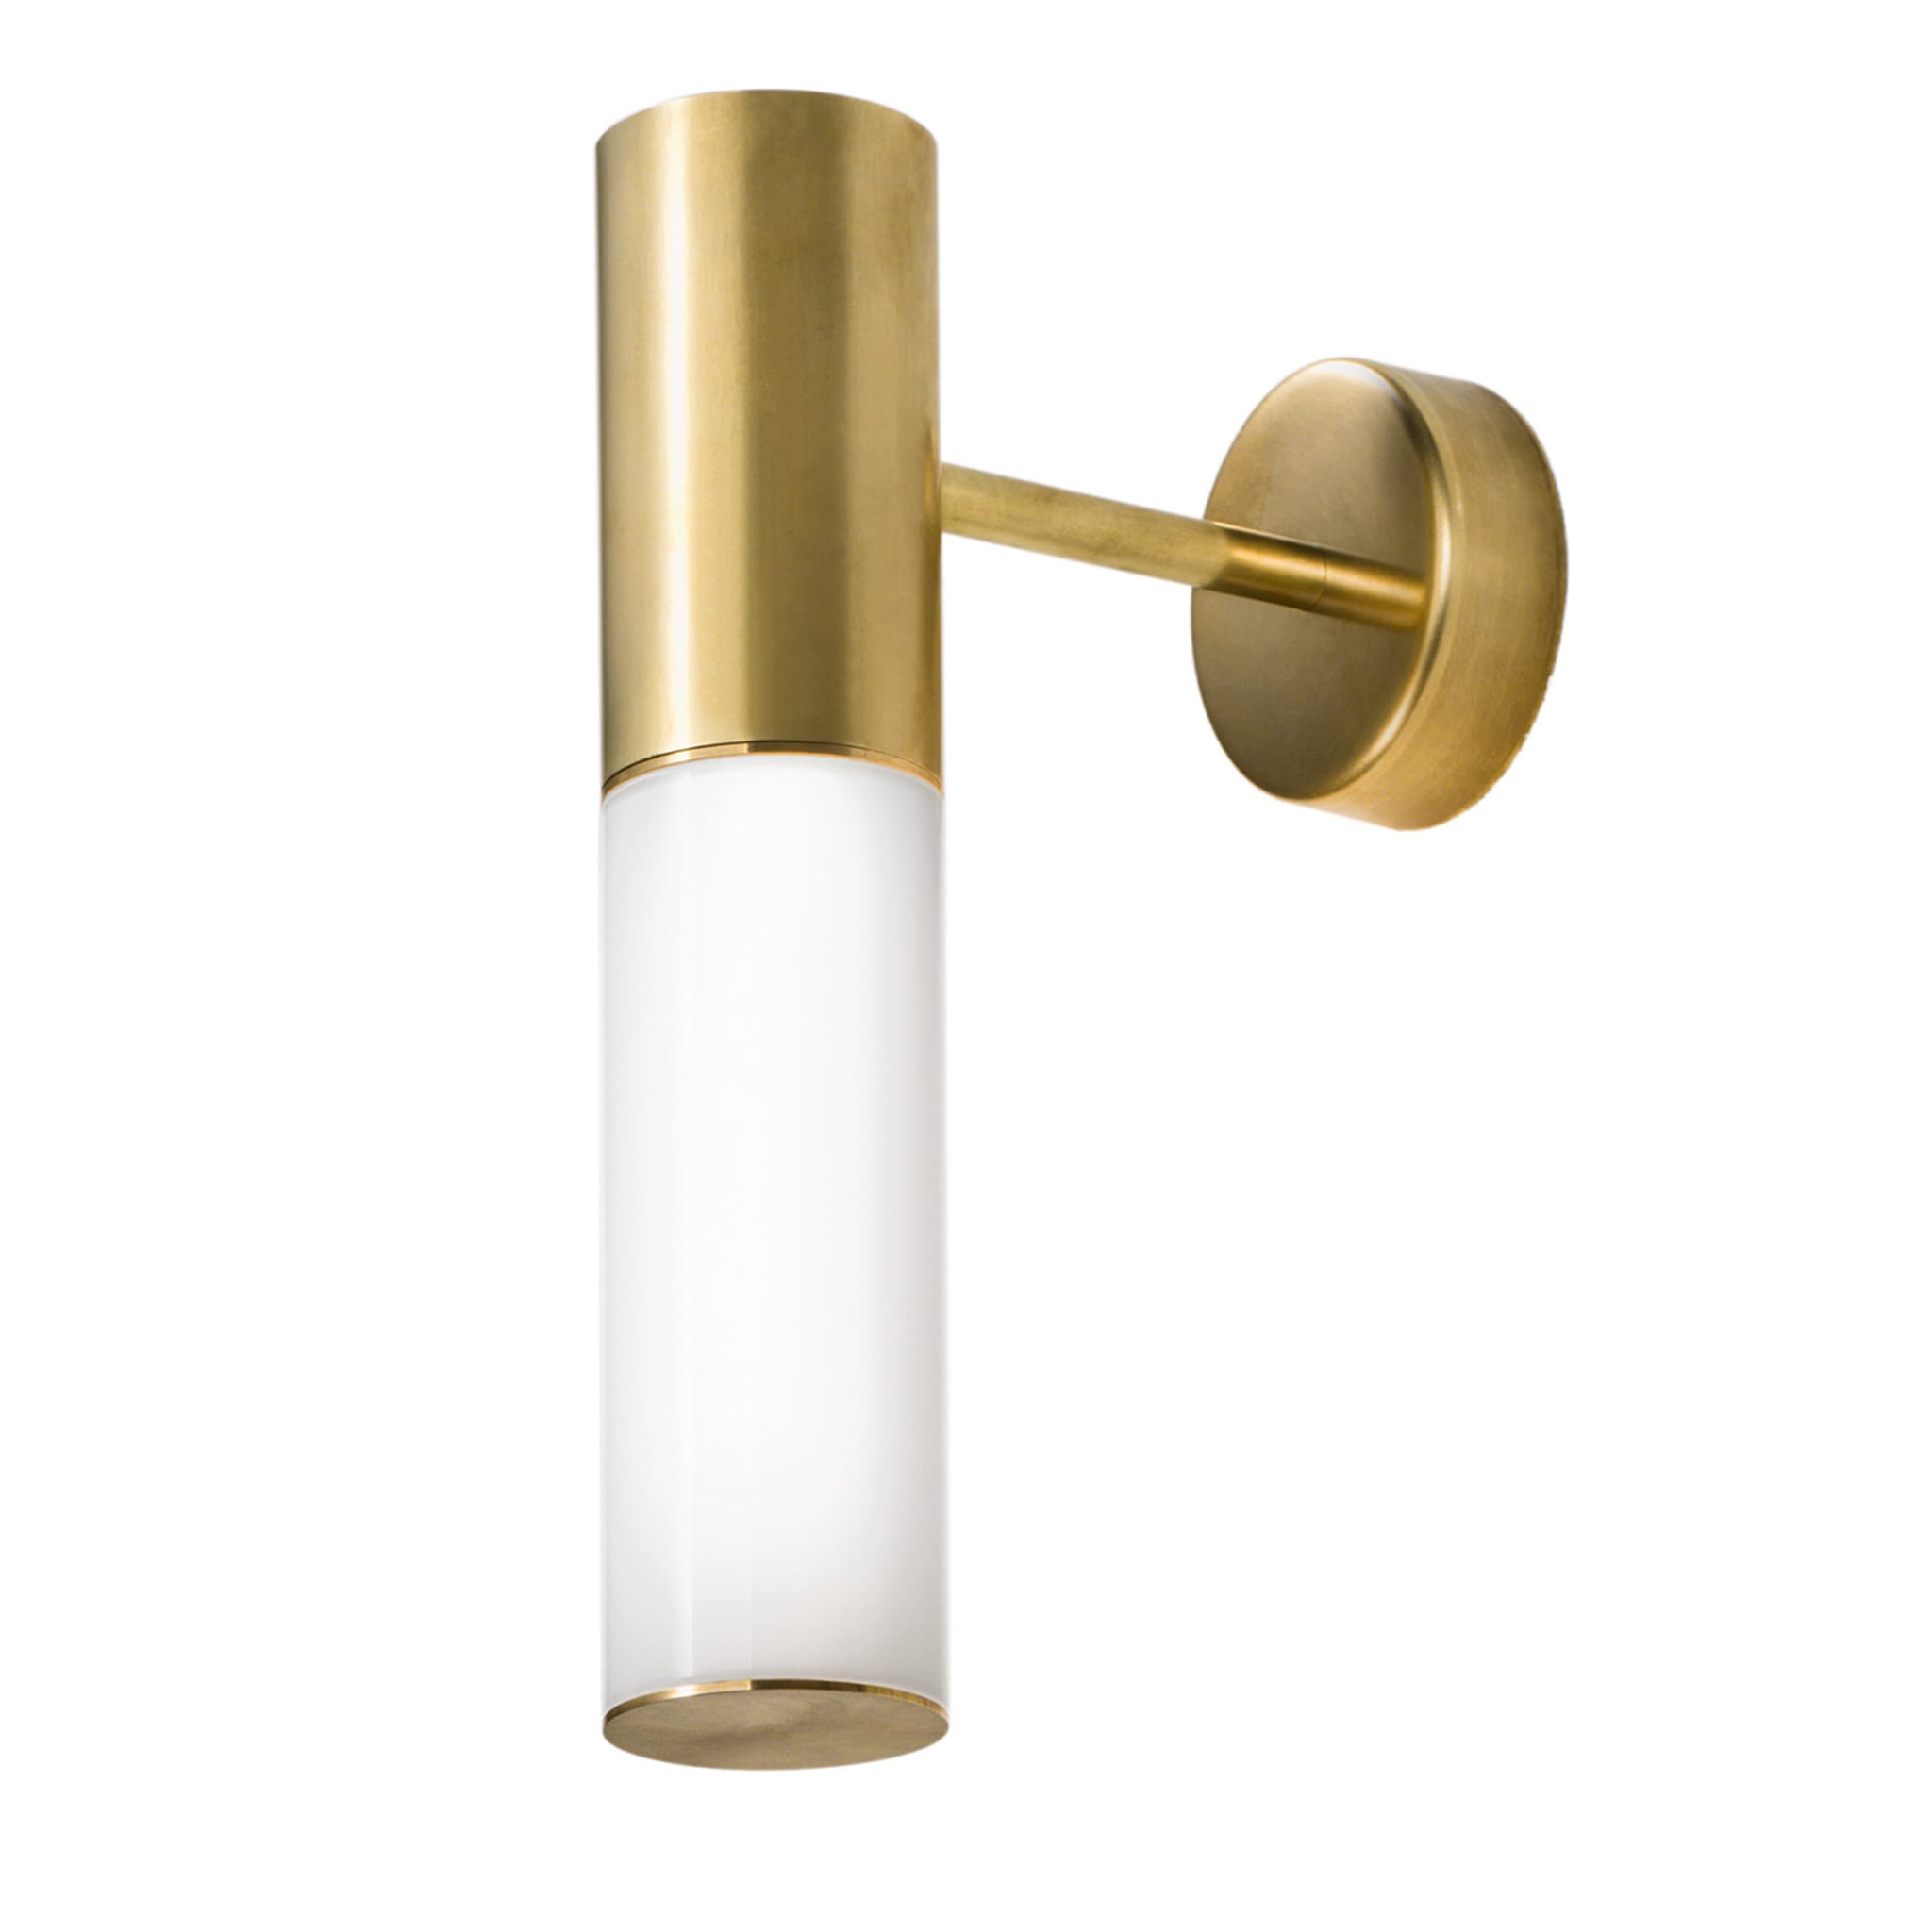 Etoile Natural Brass & White Glass Wall Lamp - Main view